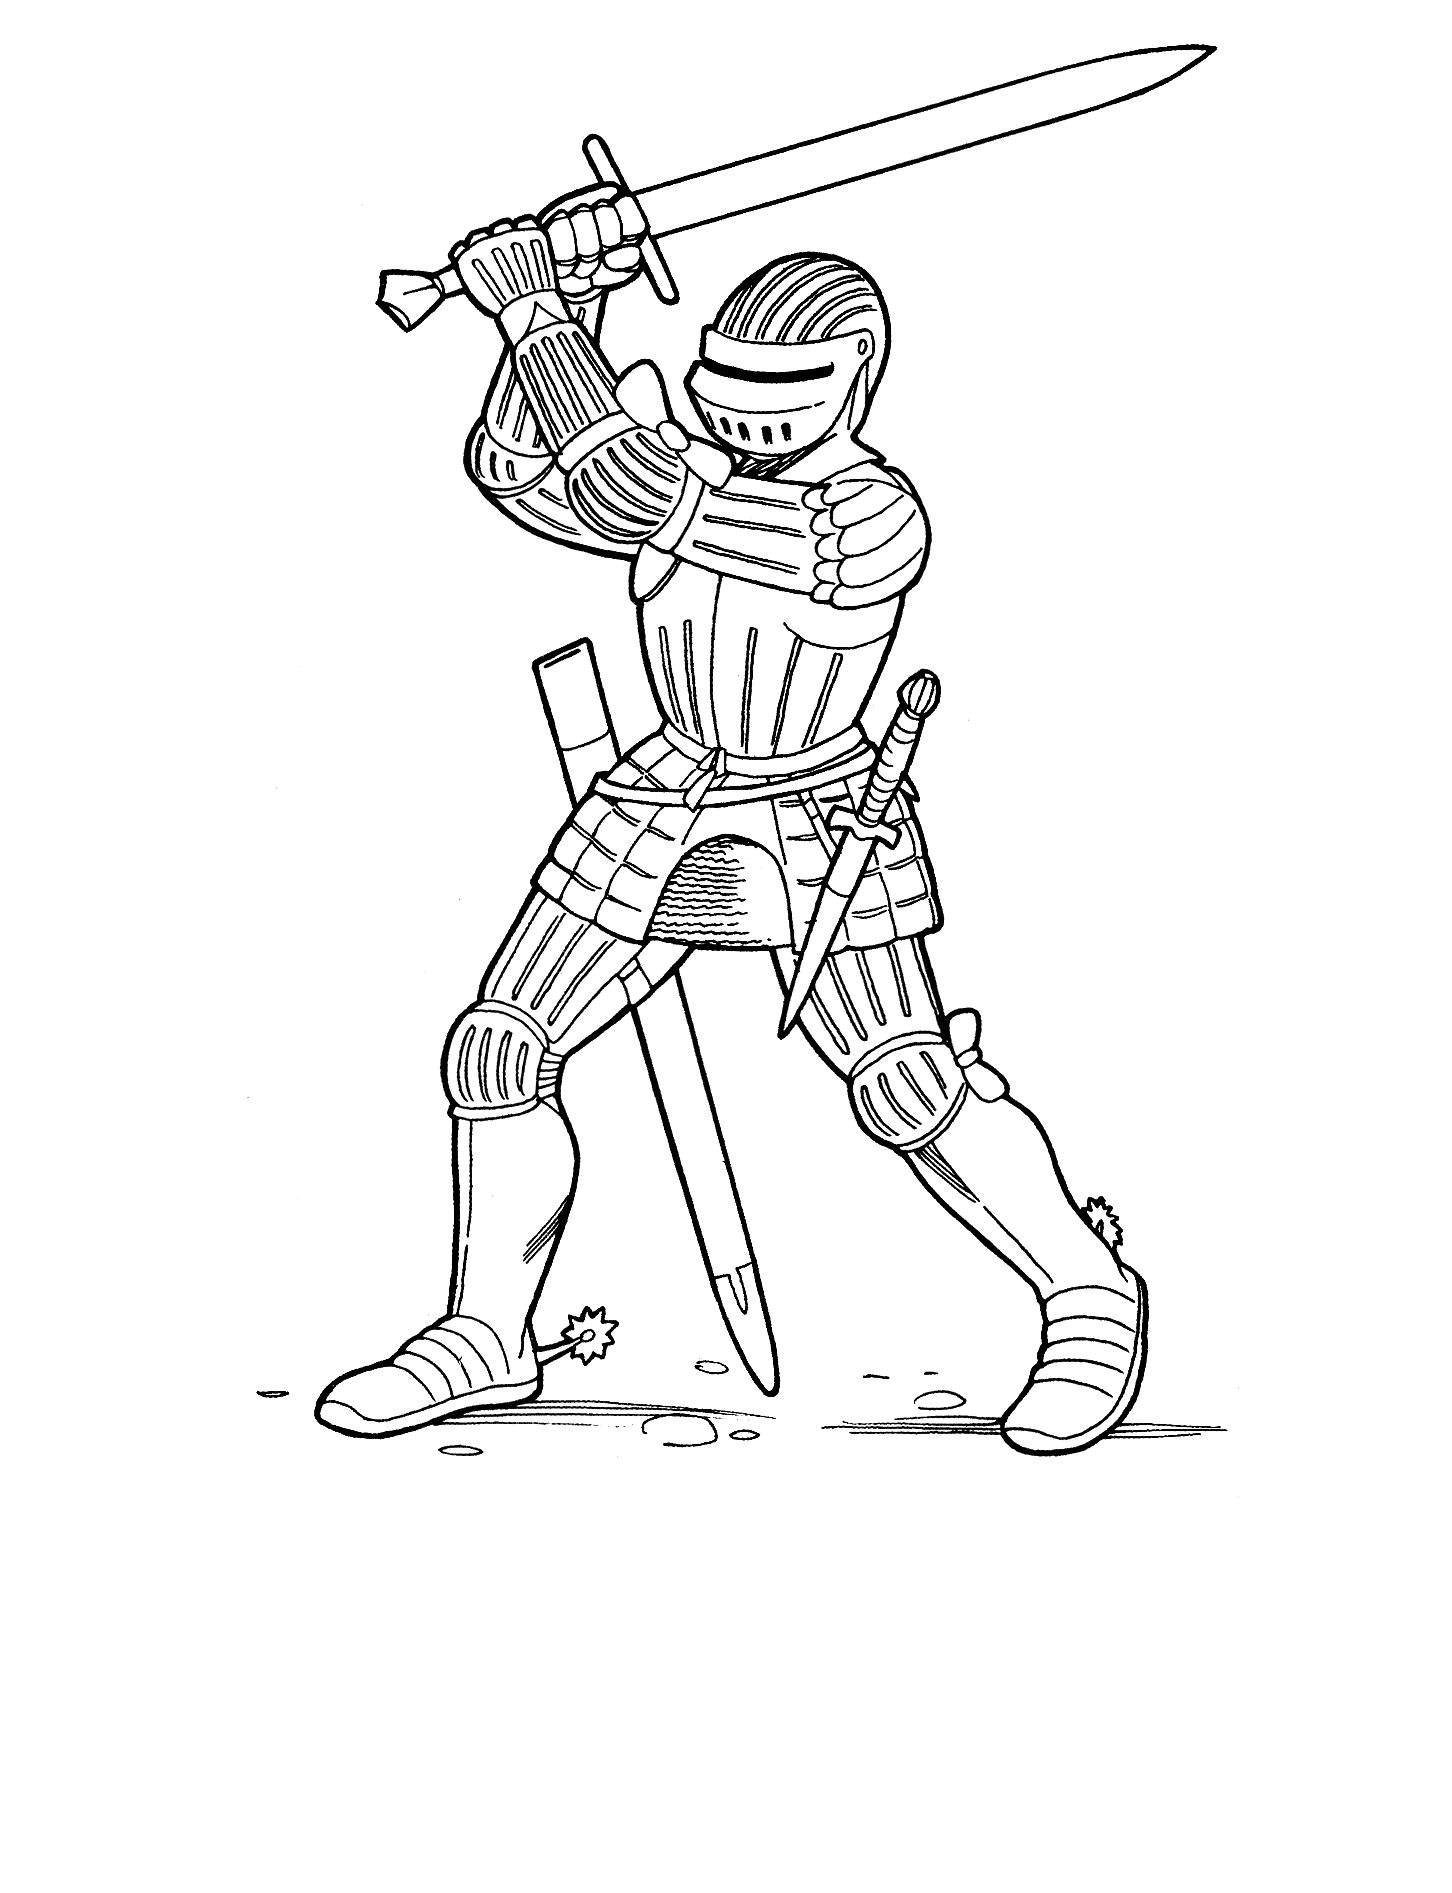 Kids Knight Coloring Page Coloring Pages